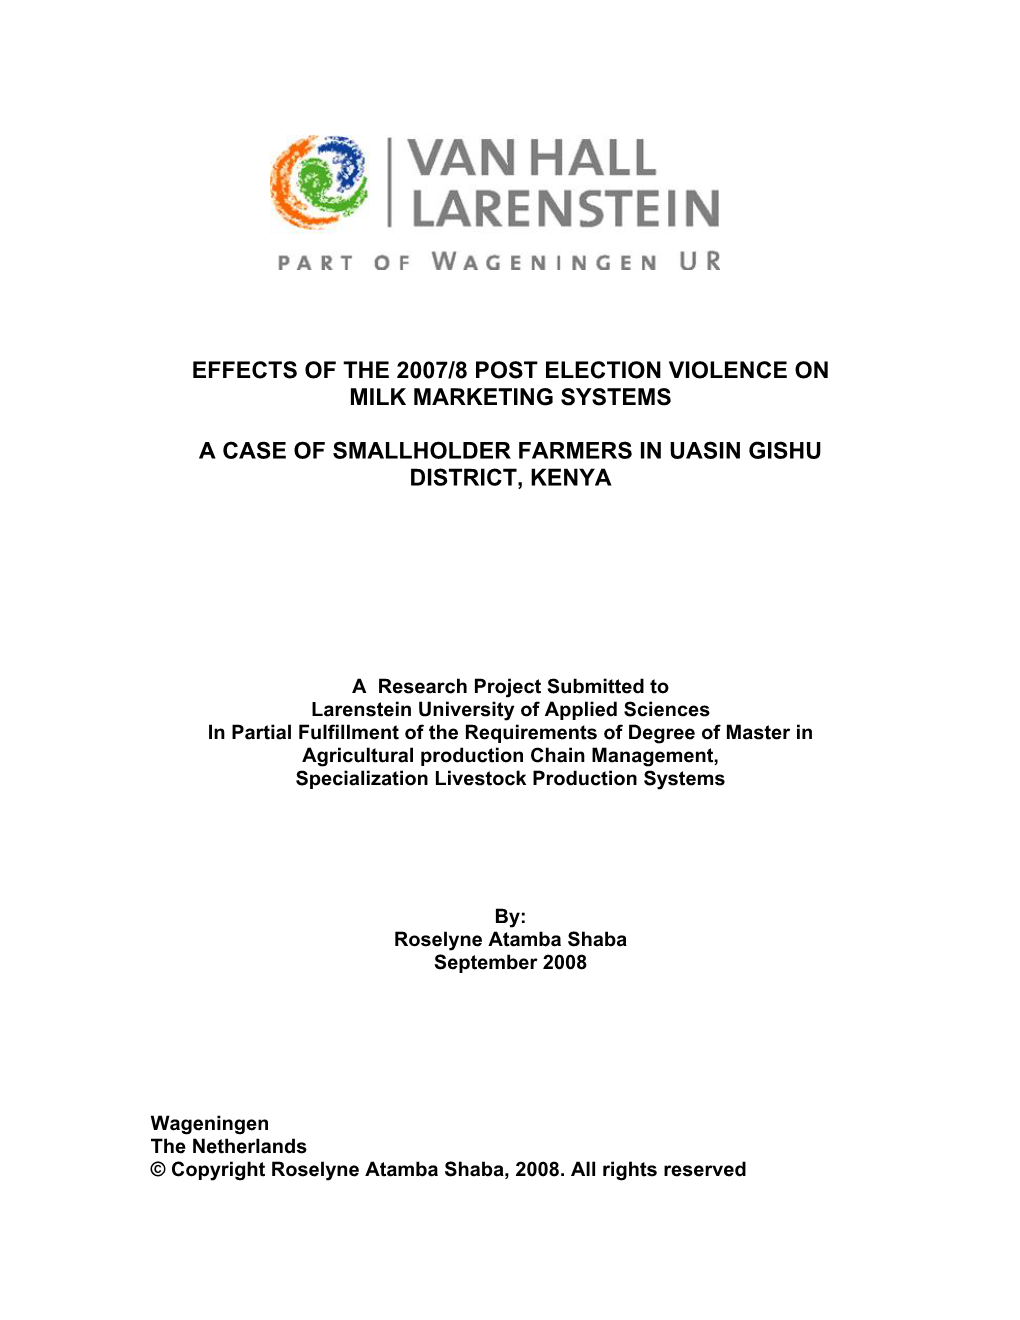 Effects of the 2007/8 Post Election Violence on Milk Marketing Systems